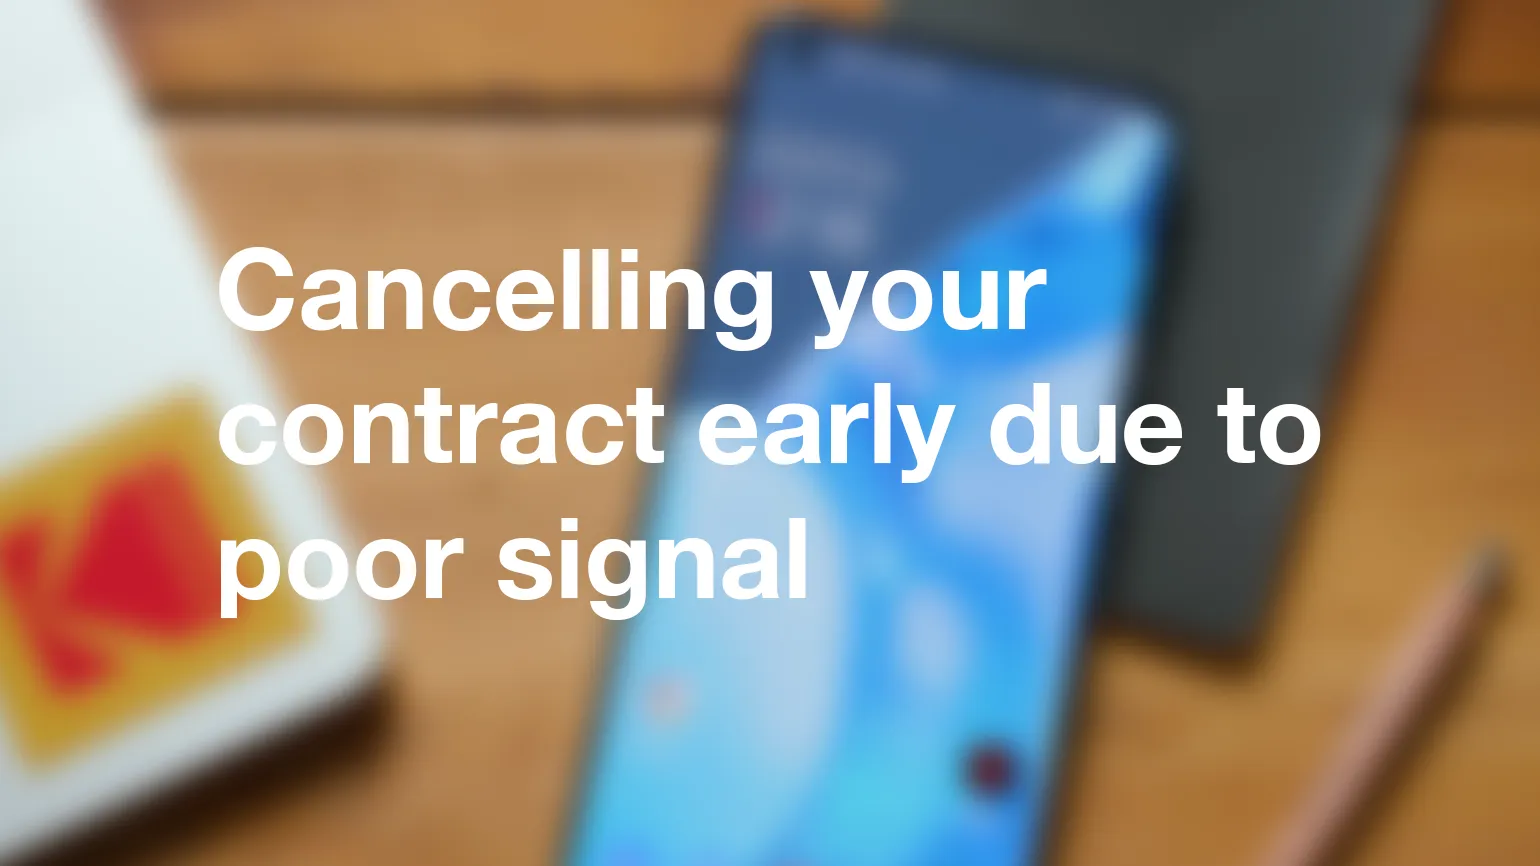 Can I cancel my contract early if my signal is bad?